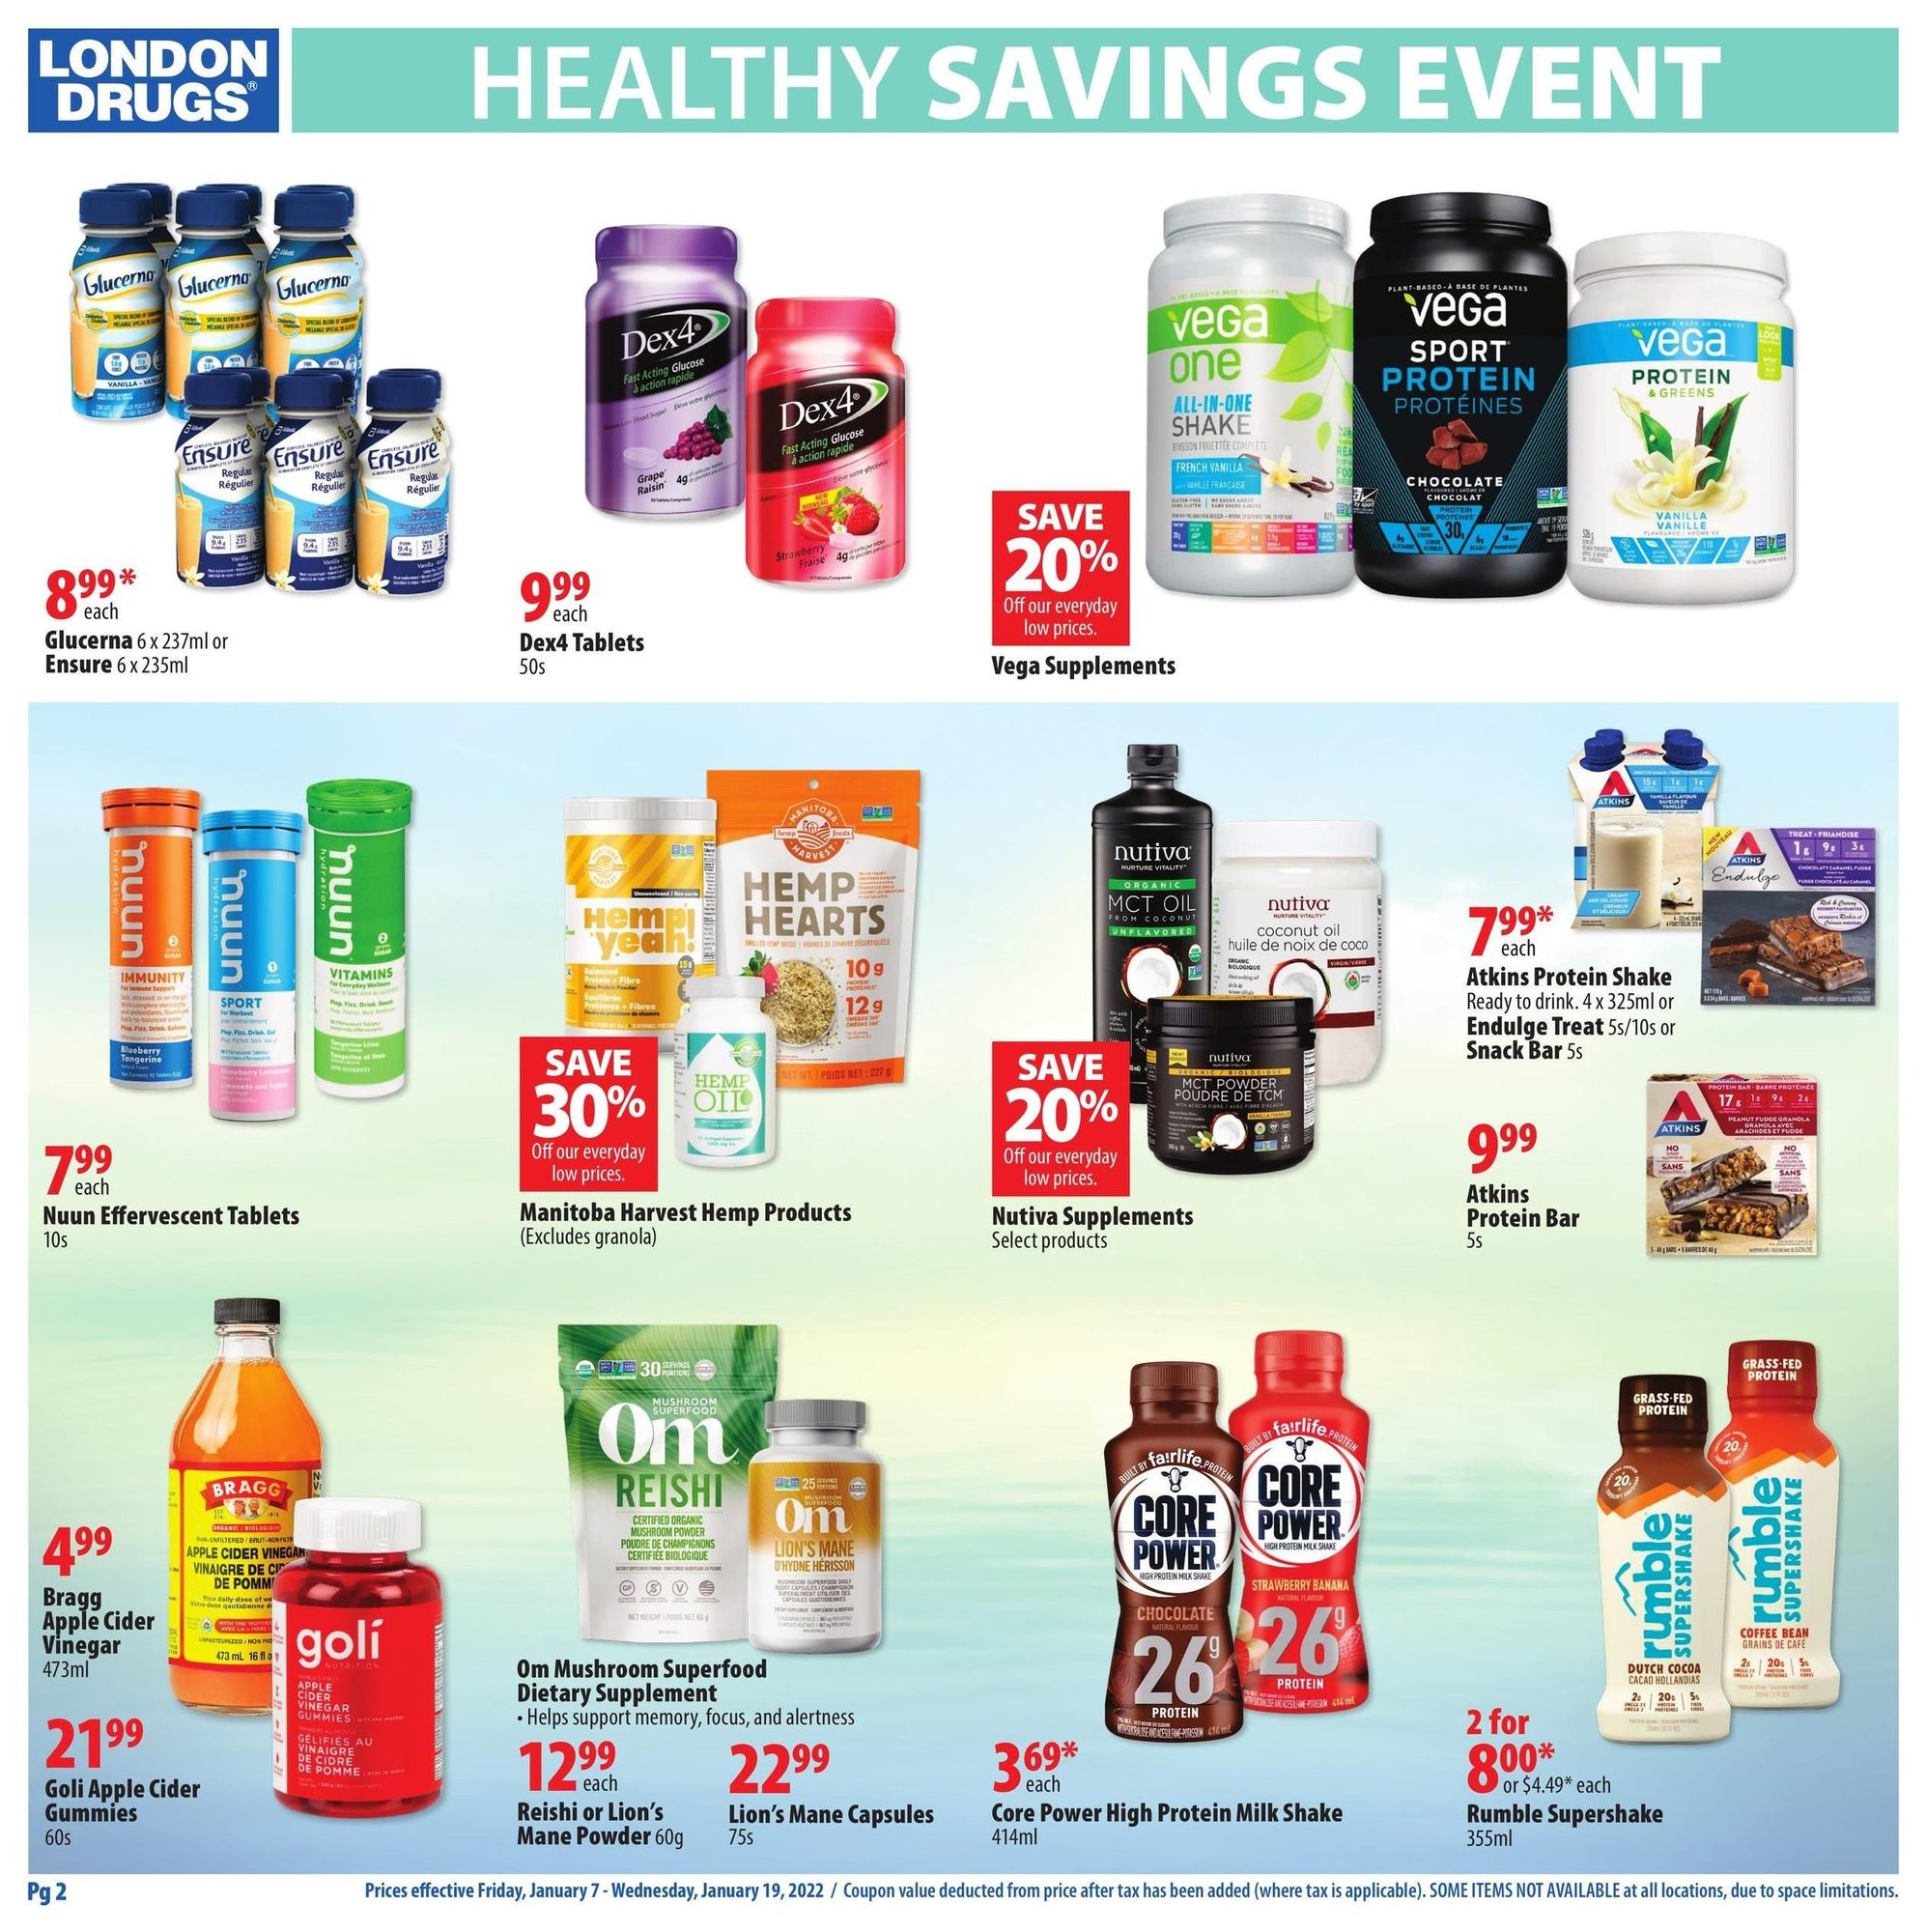 London Drugs - Healthy Savings Event - Page 2